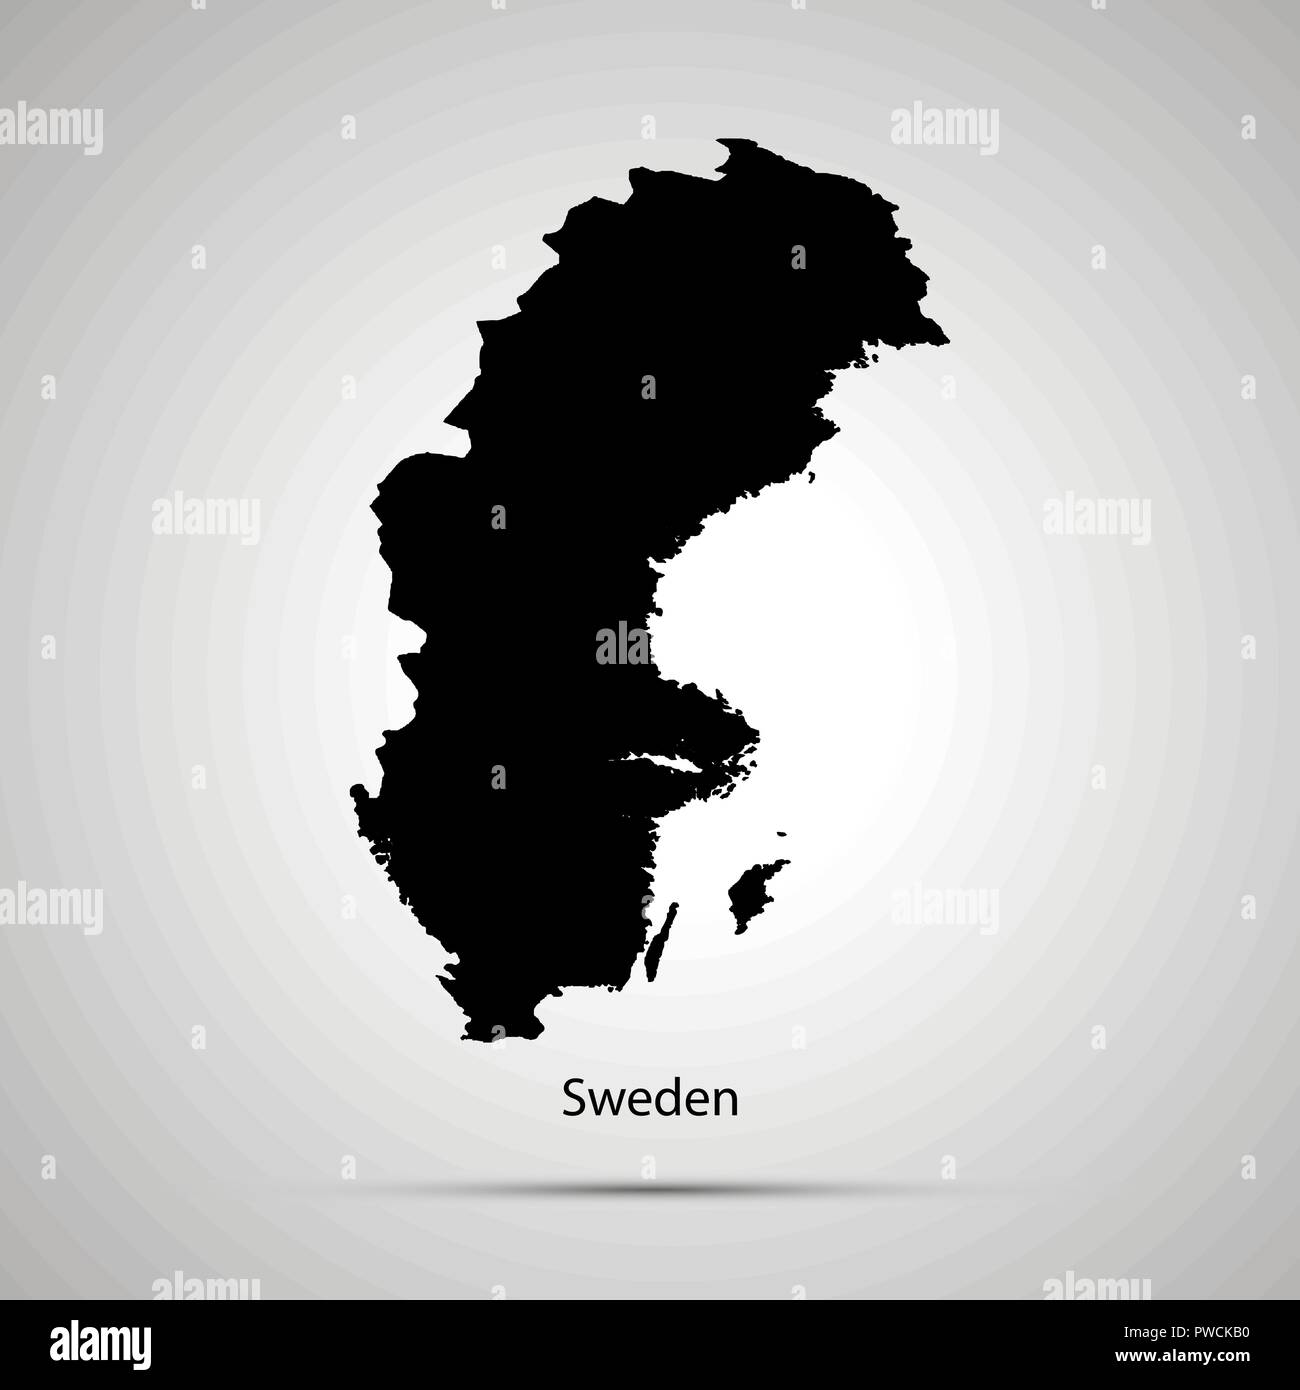 Sweden country map, simple black silhouette Stock Vector